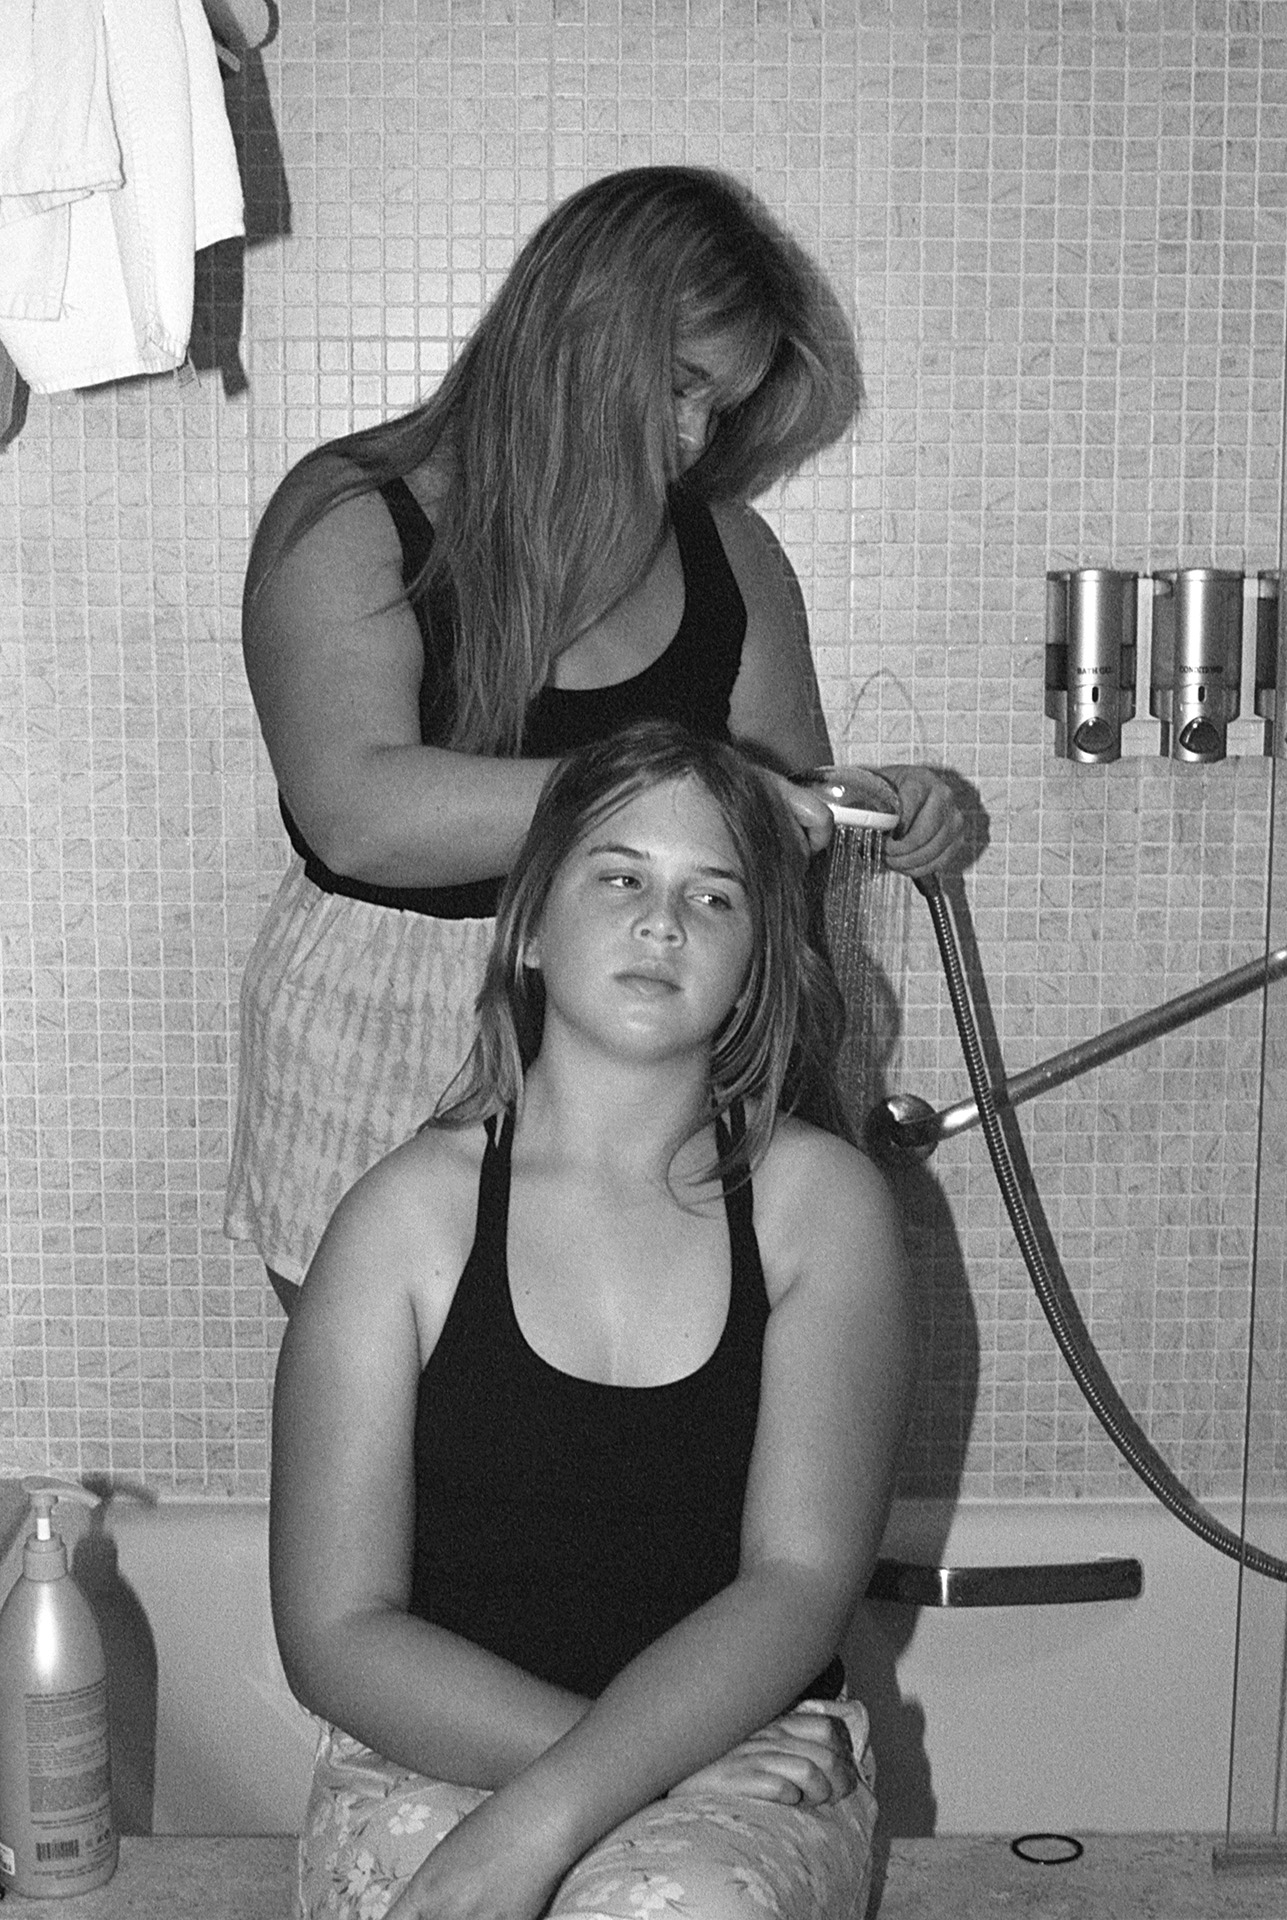 Eden sits on the edge of a bathtub, while Mariah stands inside of the bath with the shower head in hand. She is focussed on rinsing Eden’s hair, whilst Eden looks off into the distance.